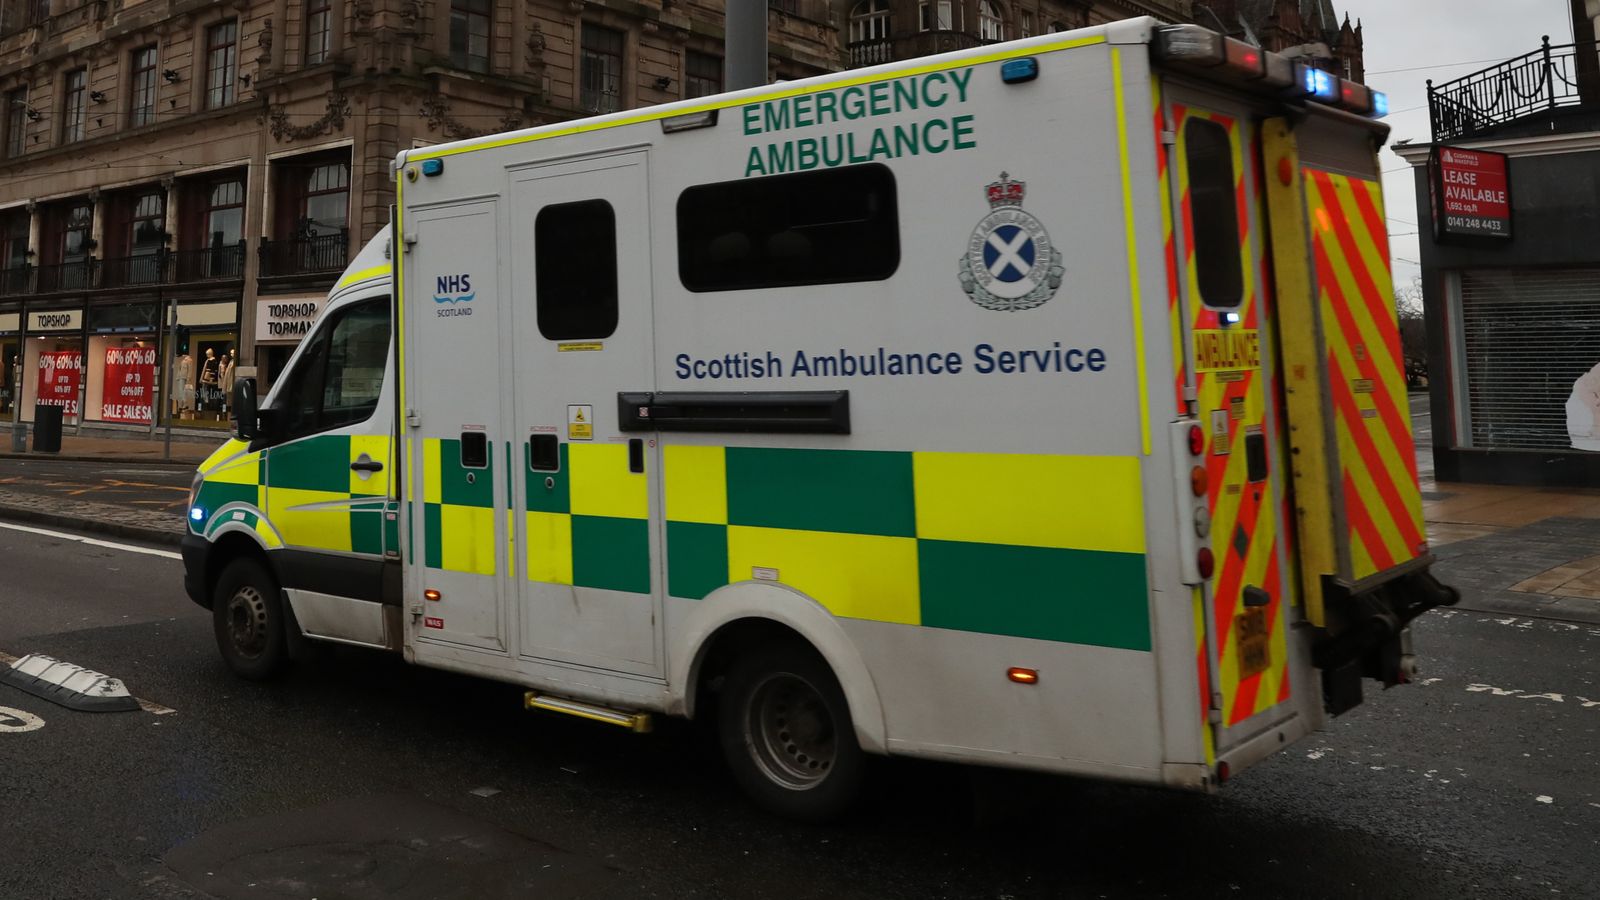 Almost 60 attacks on frontline workers in Scotland every day, according to new figures